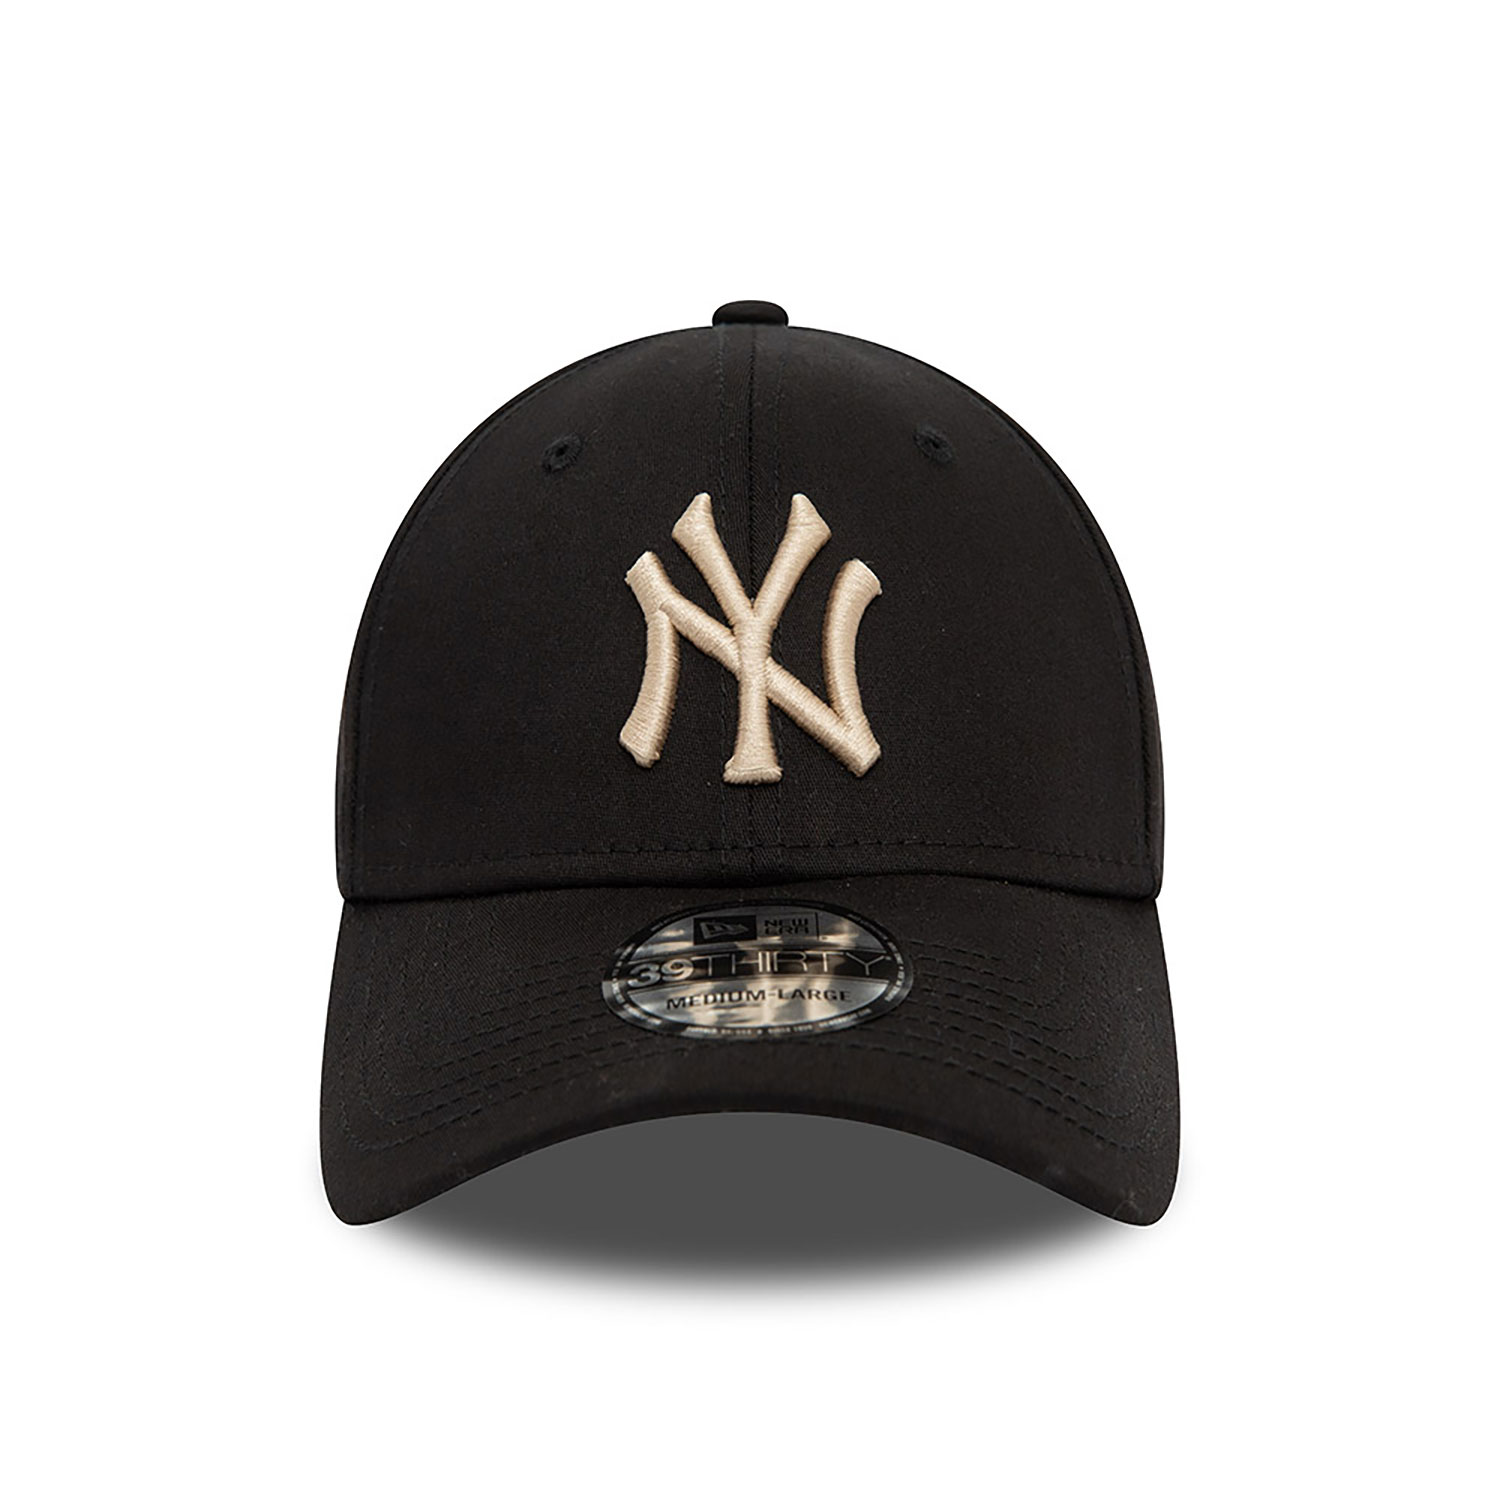 New York Yankees League Essential Black 39THIRTY Stretch Fit Cap